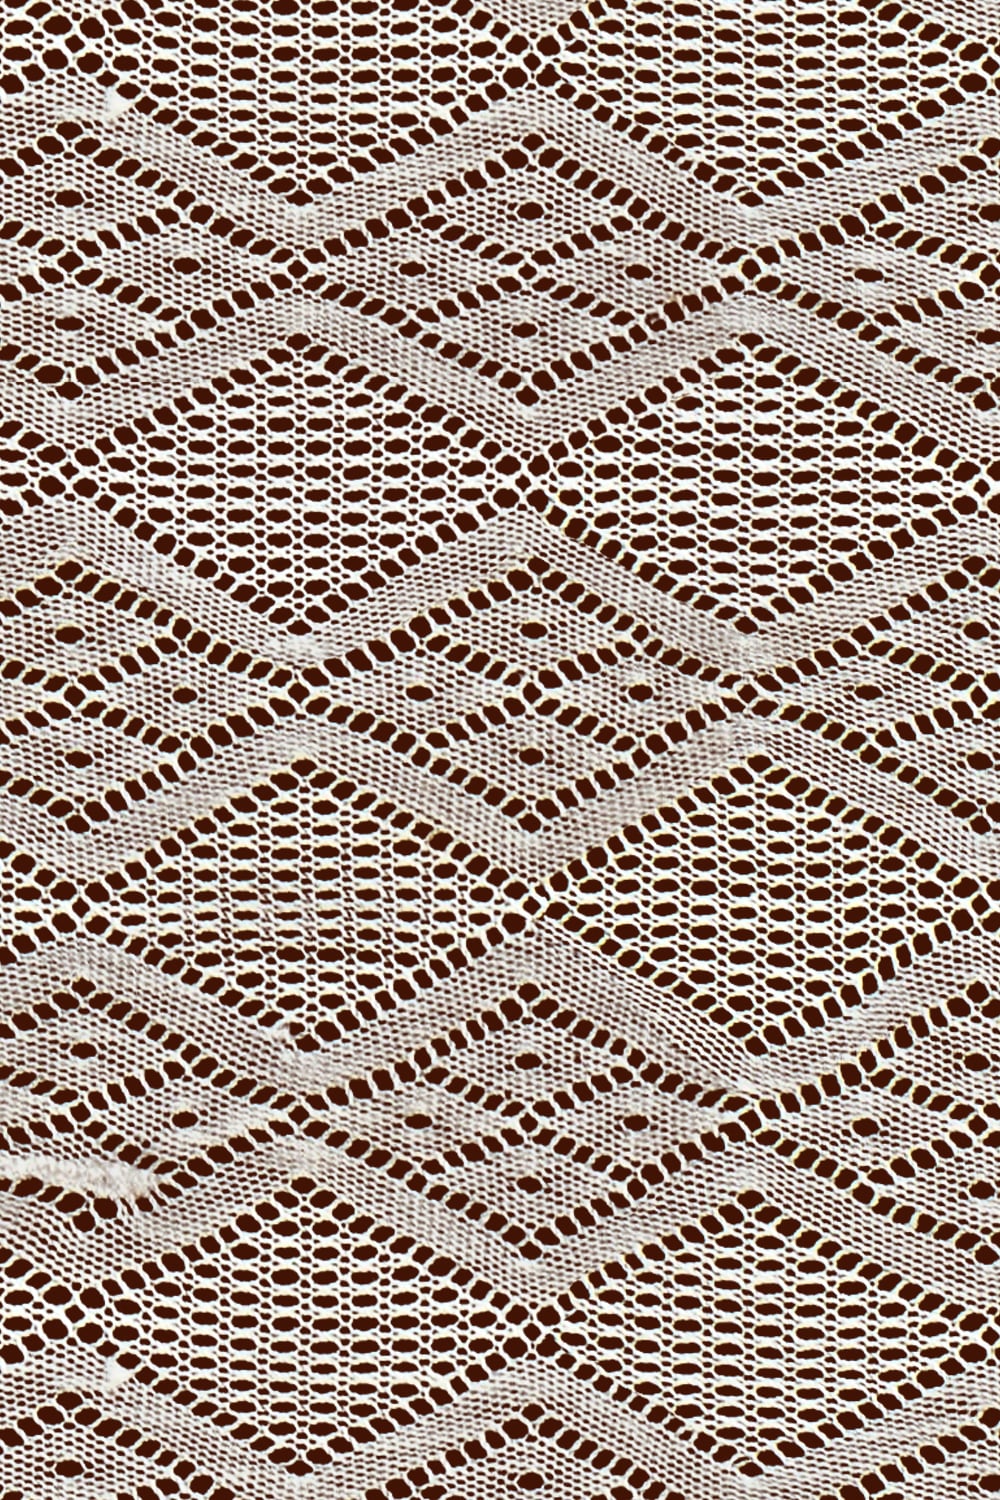 Crocheted Diamond Patterned Cloth close-up